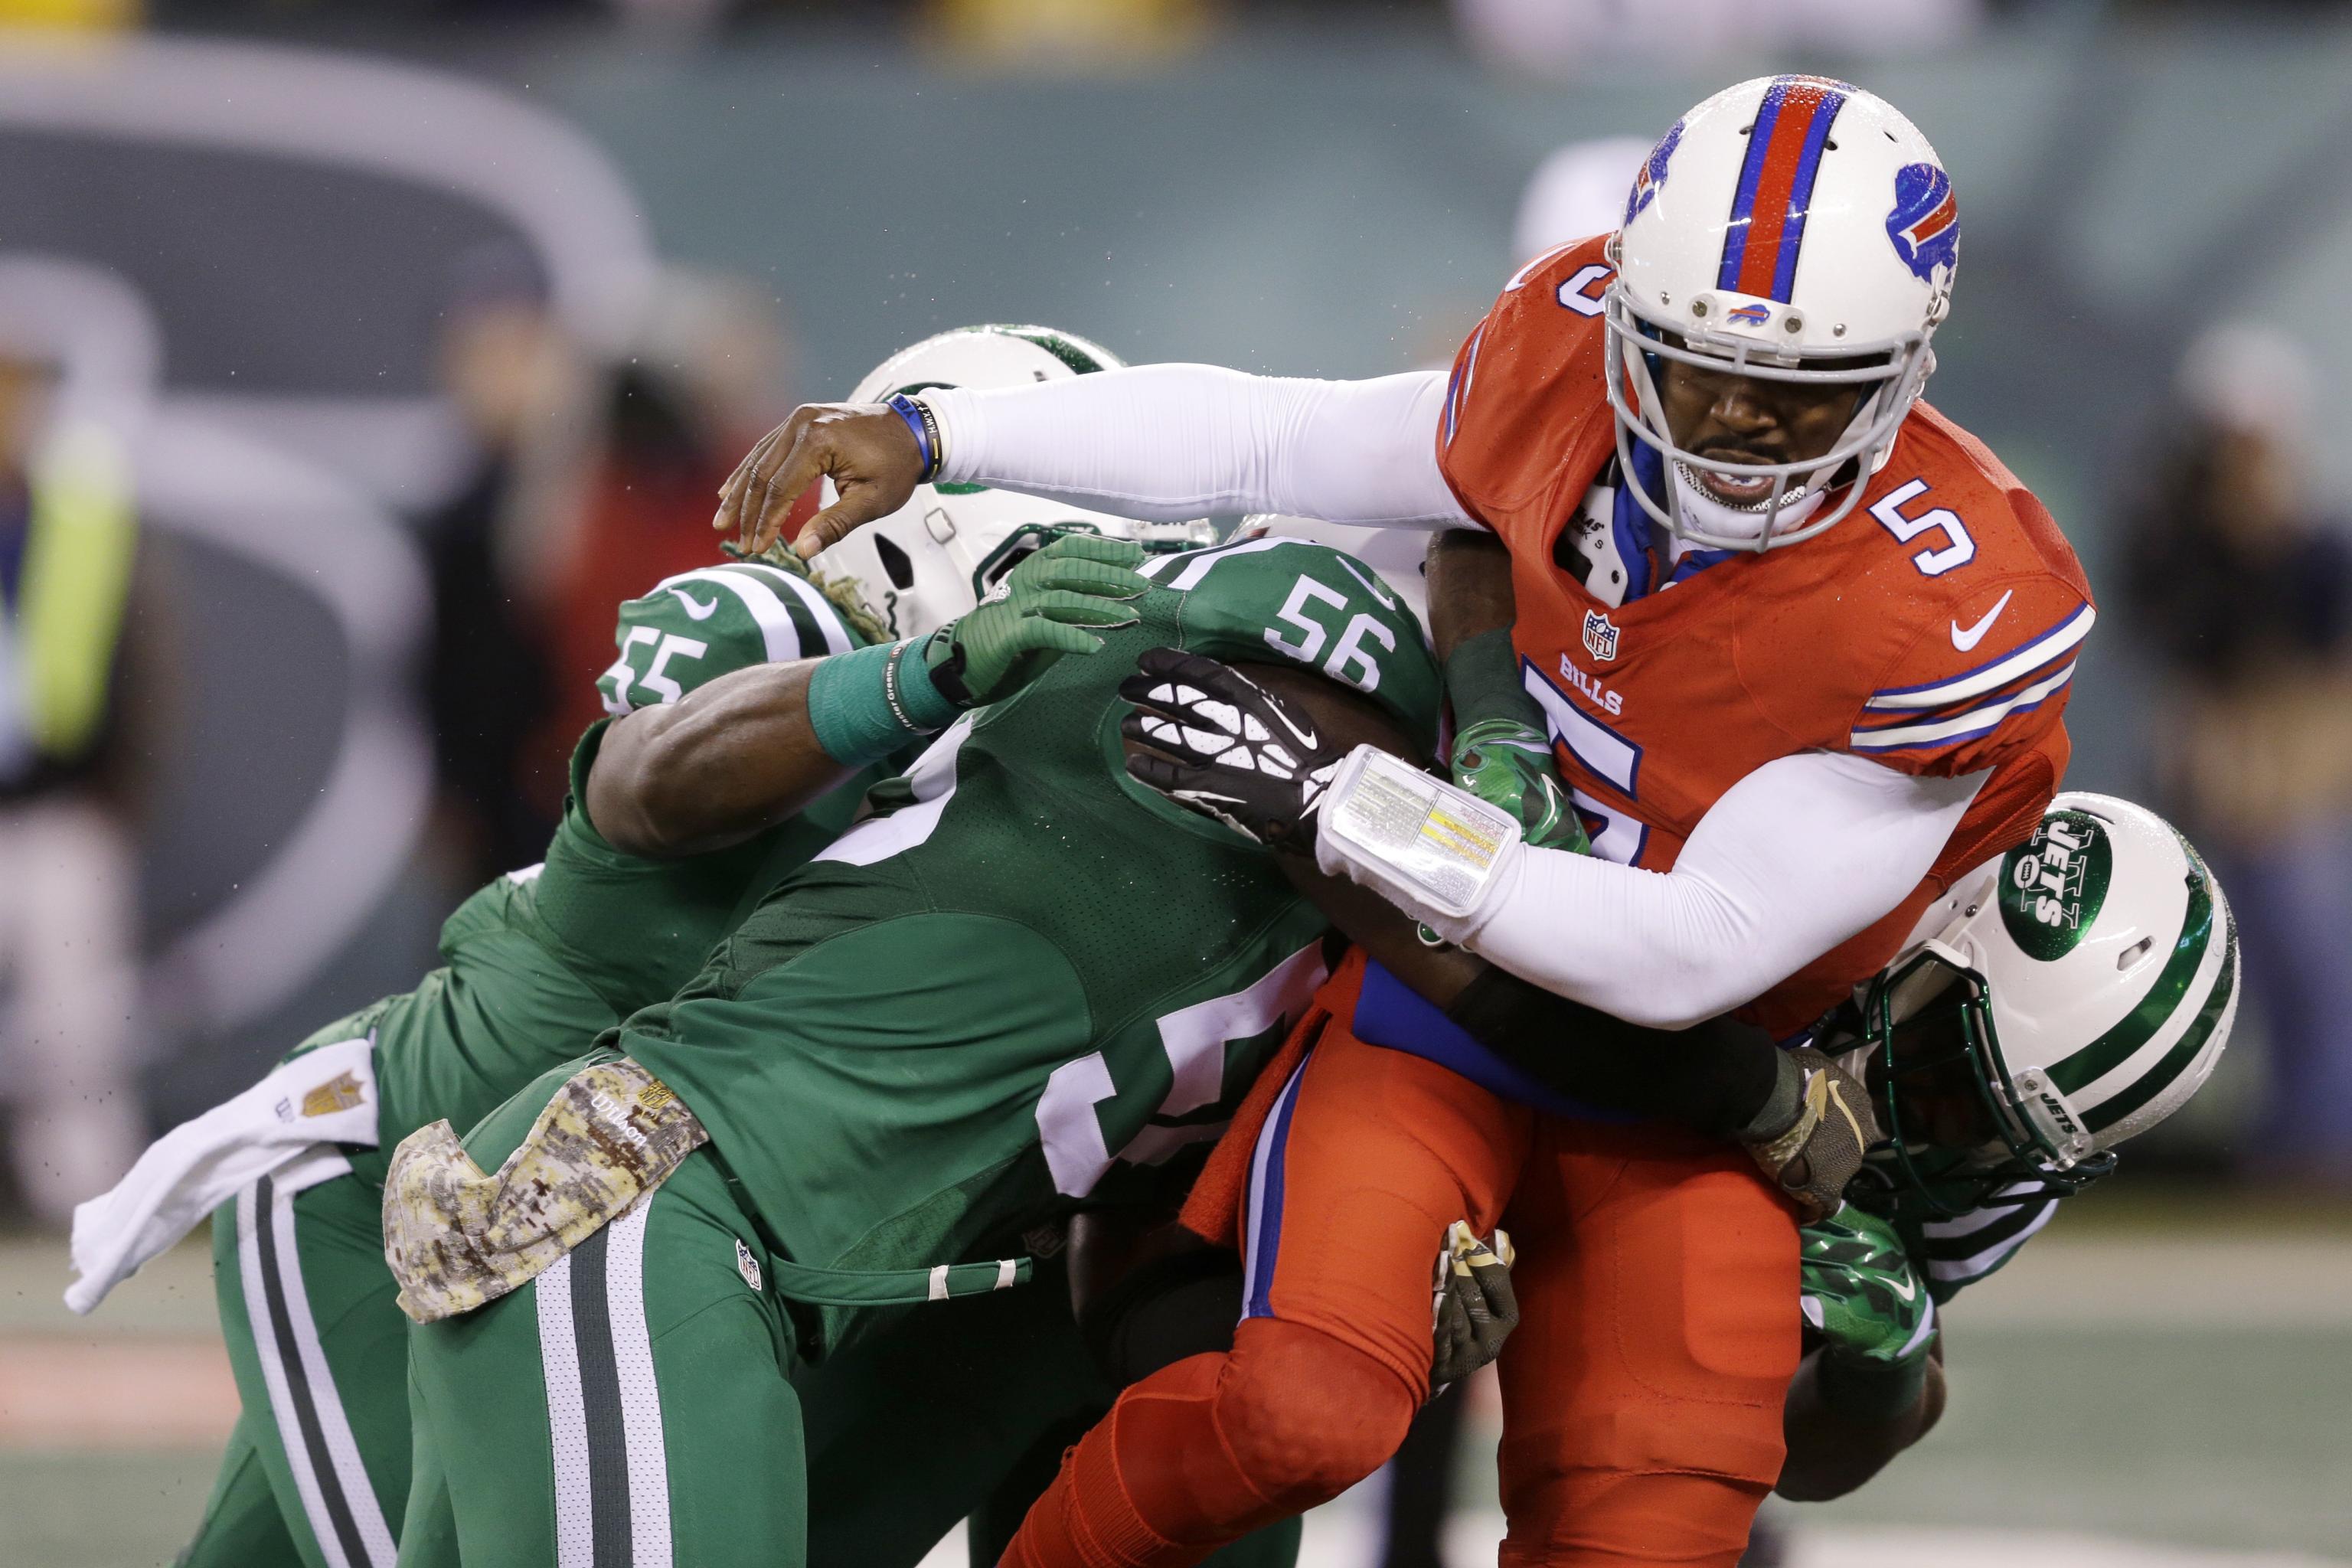 NFL's 'Color Rush' Uniforms for Bills-Jets Were a Disaster for